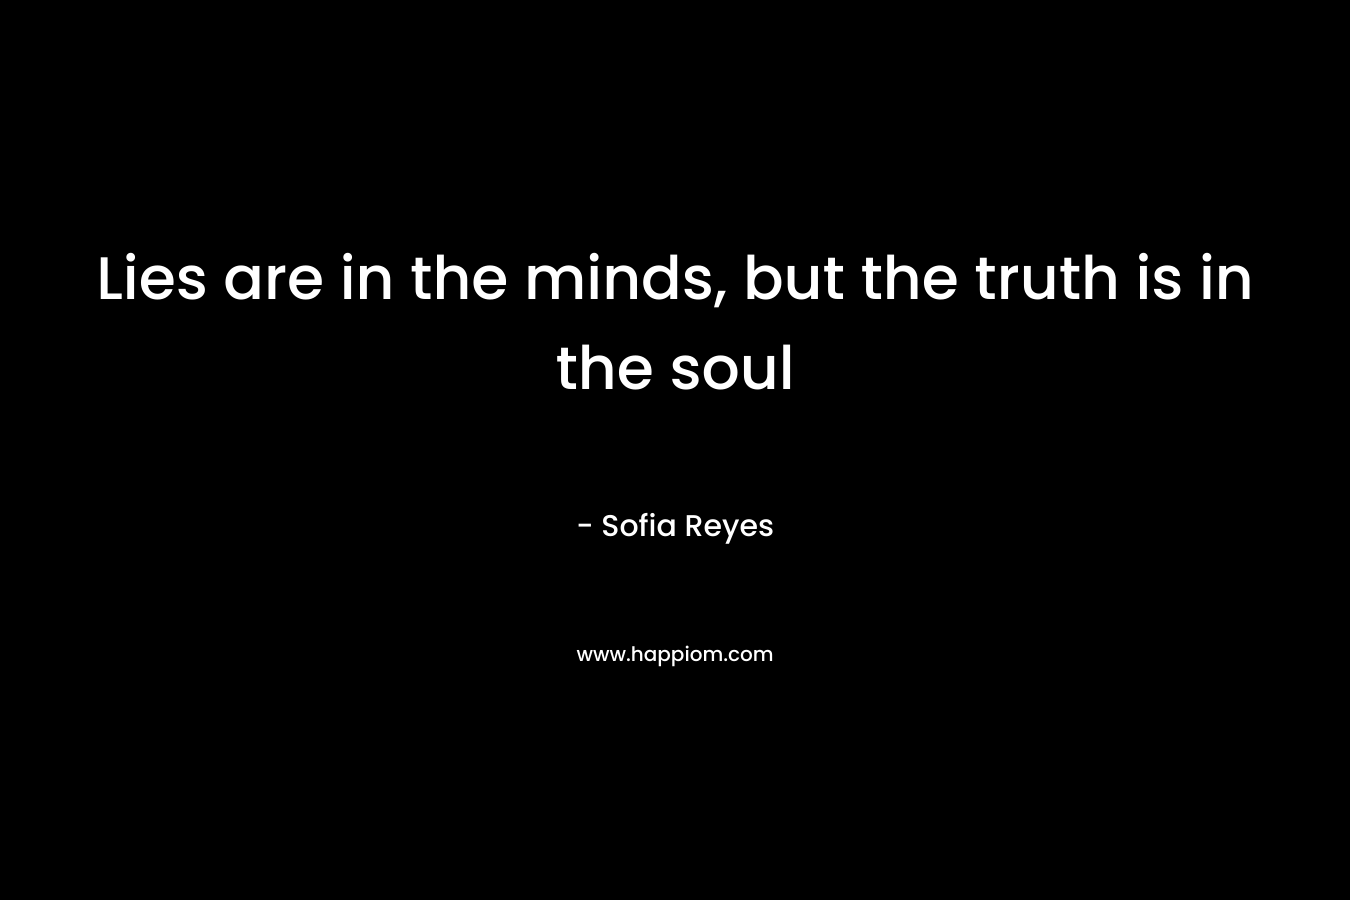 Lies are in the minds, but the truth is in the soul – Sofia Reyes